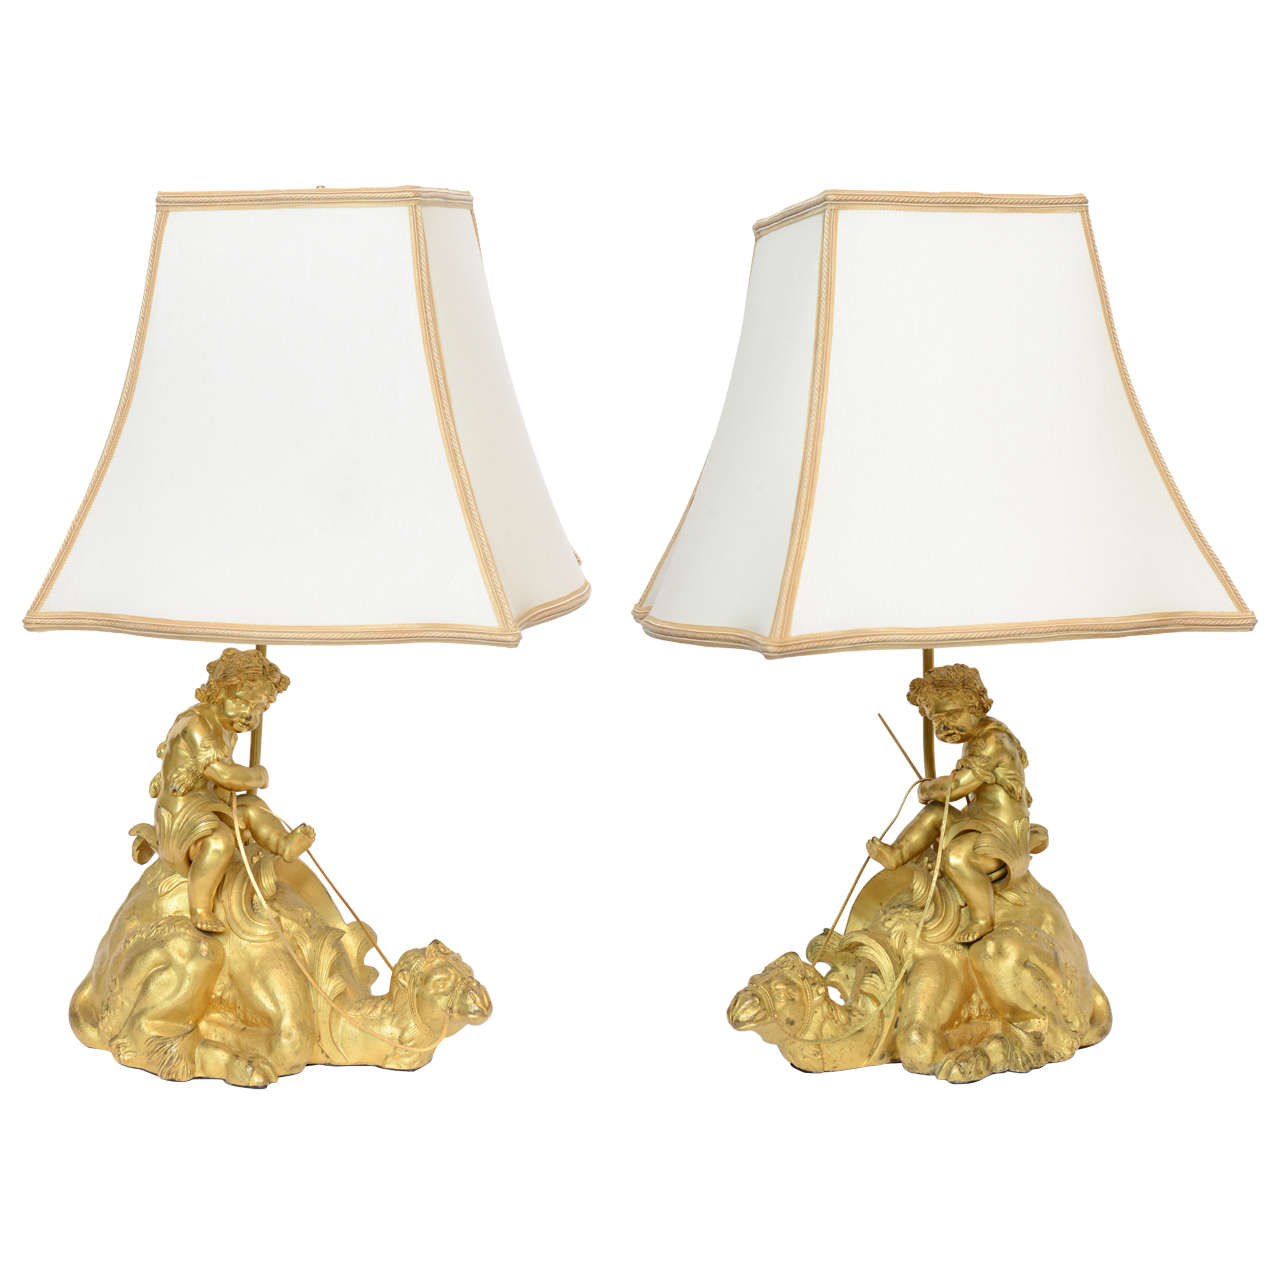 French Orientalist Gilt Bronze Lamps with Cupids Riding Camels For Sale